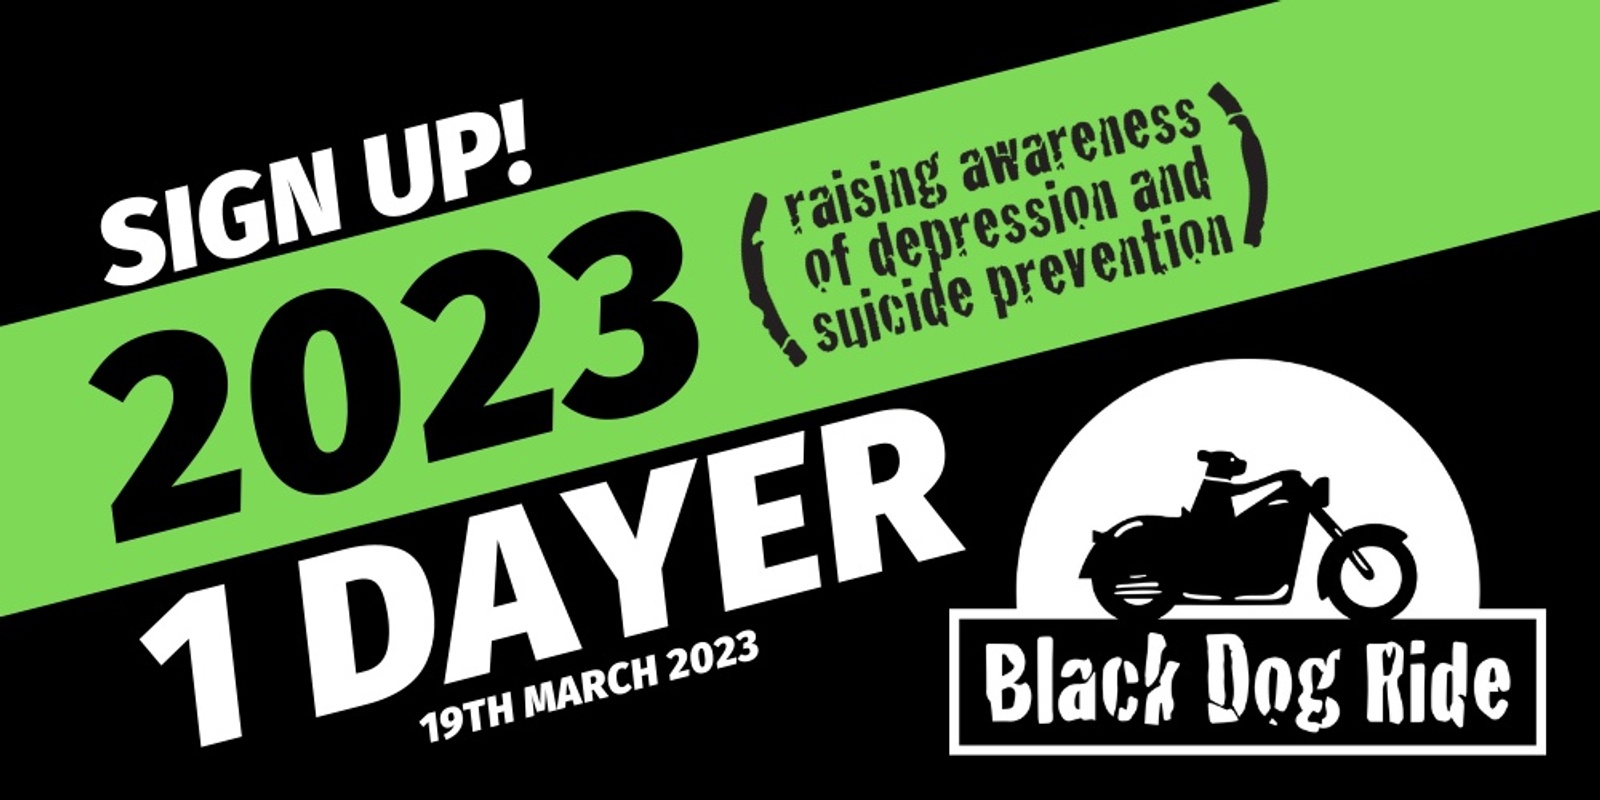 Banner image for Port Macquarie - NSW - Black Dog Ride 1 Dayer 2023